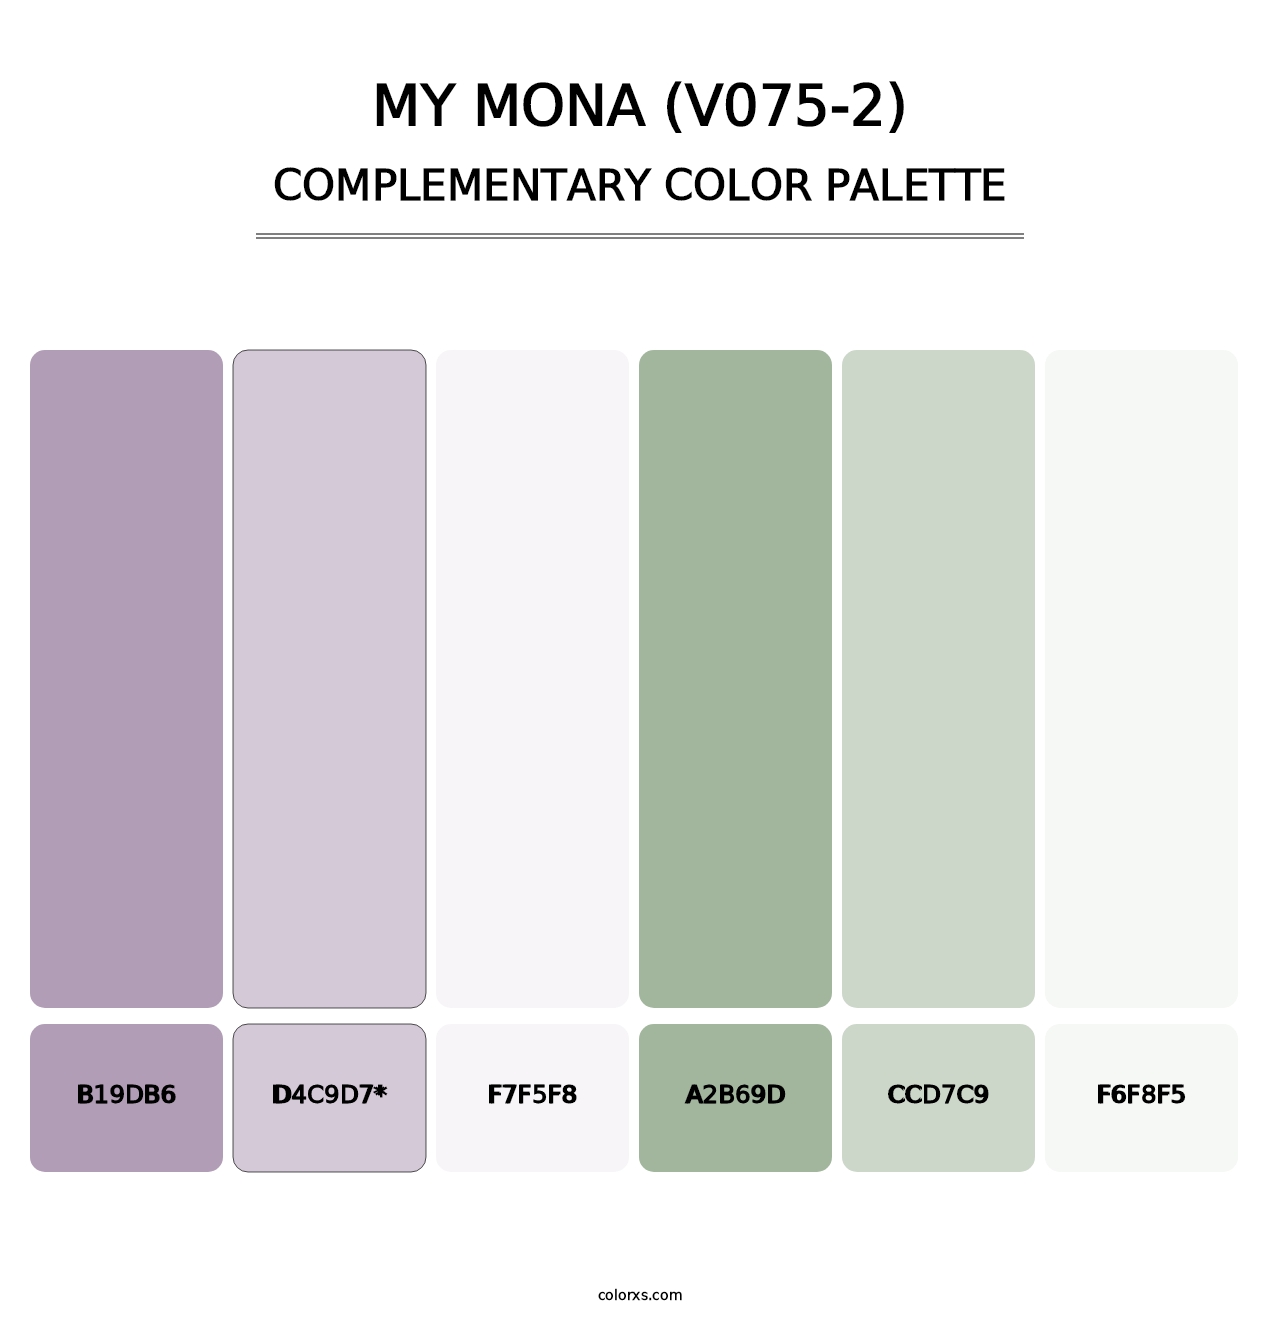 My Mona (V075-2) - Complementary Color Palette